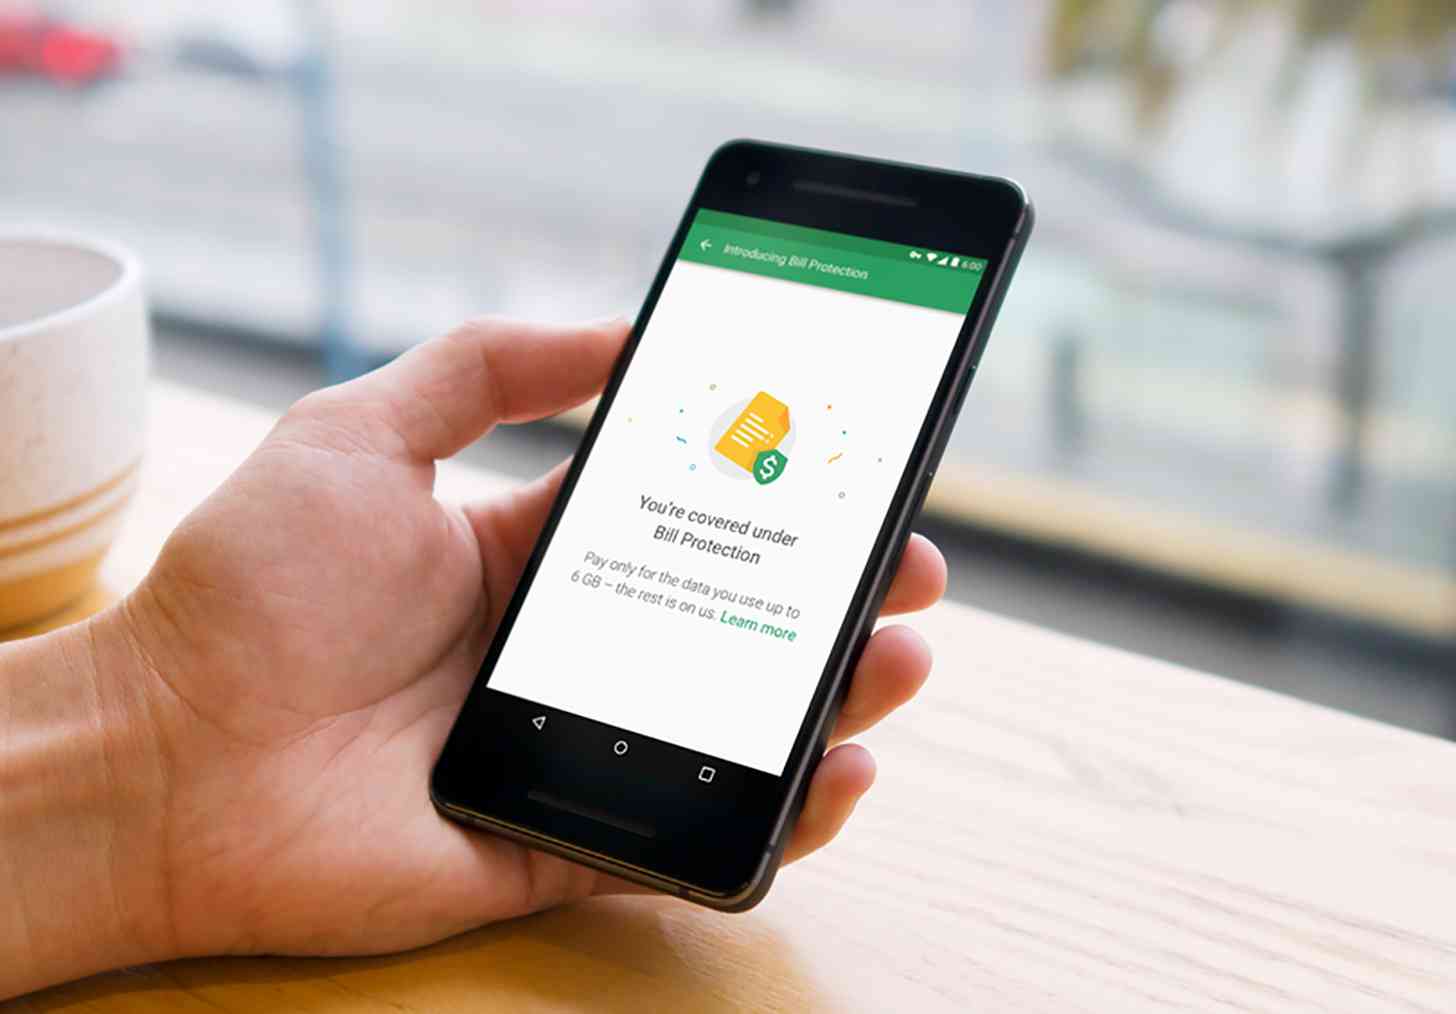 Google Project Fi Bill Protection